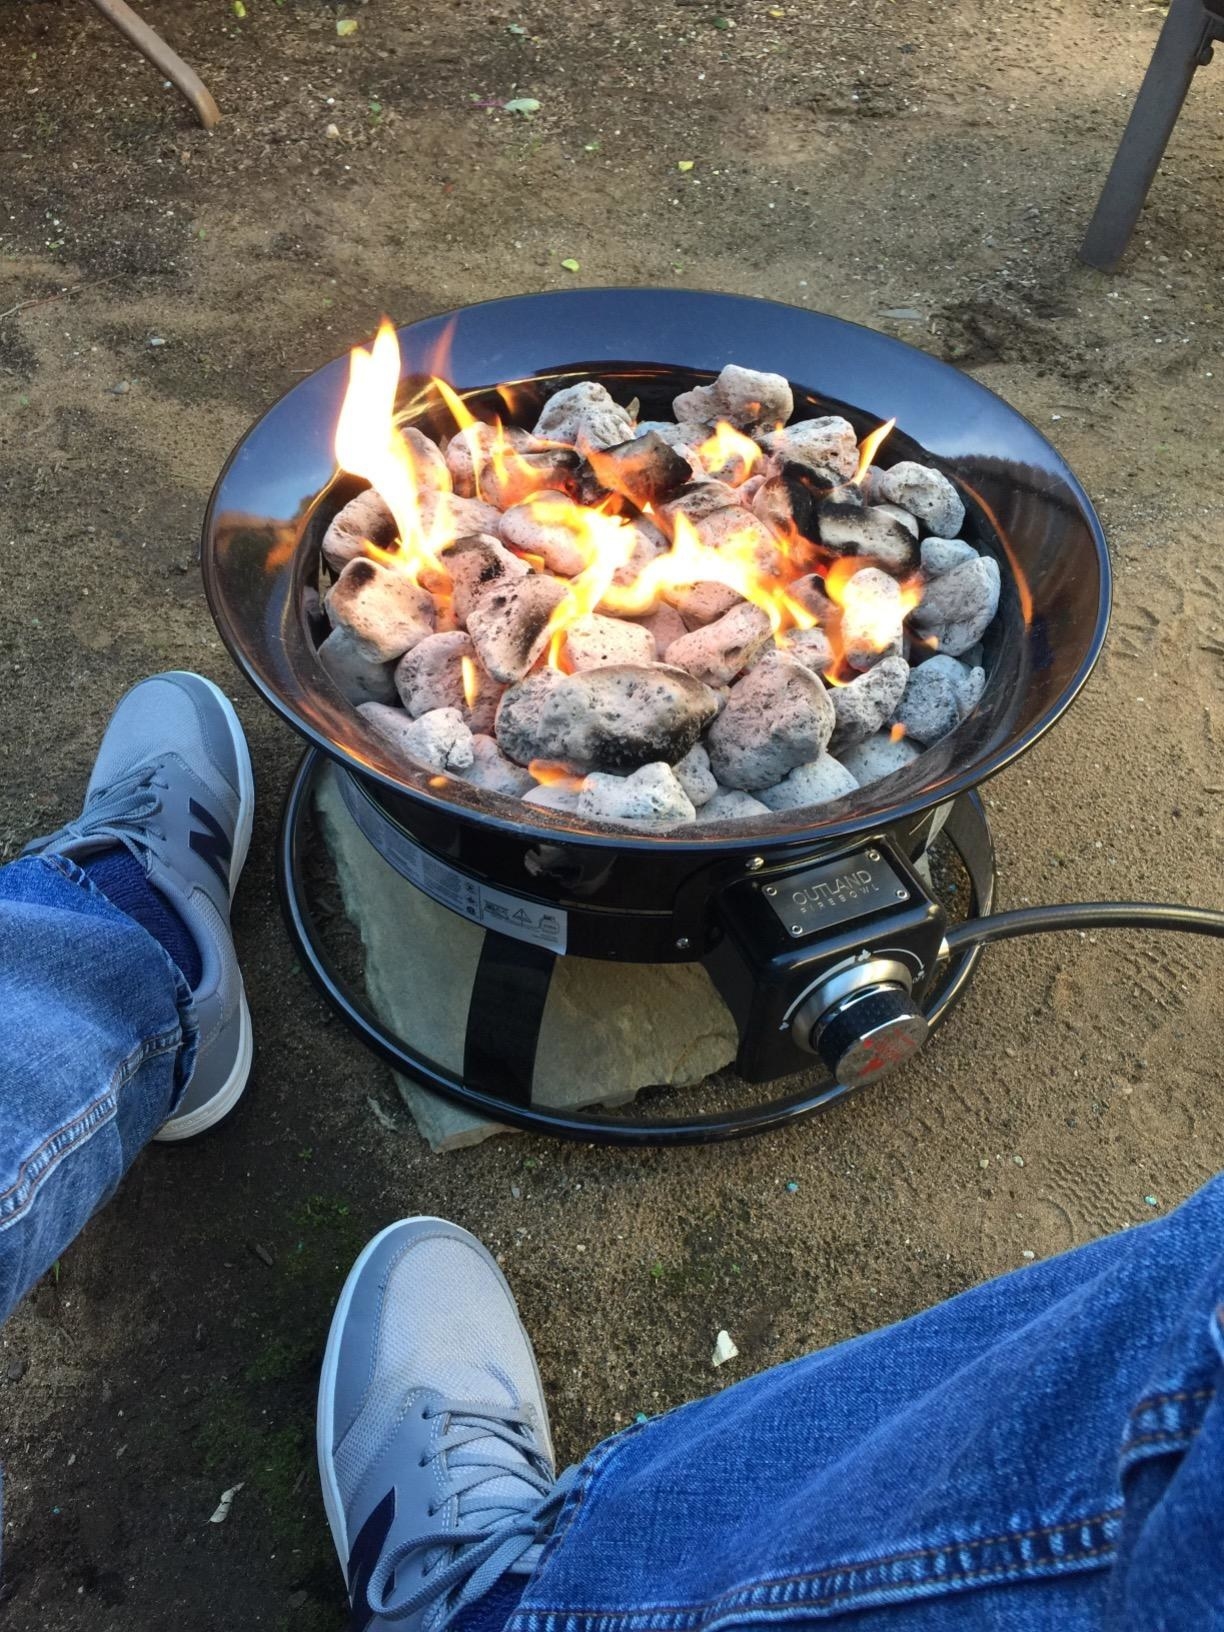 A reviewer uses the product for a campfire